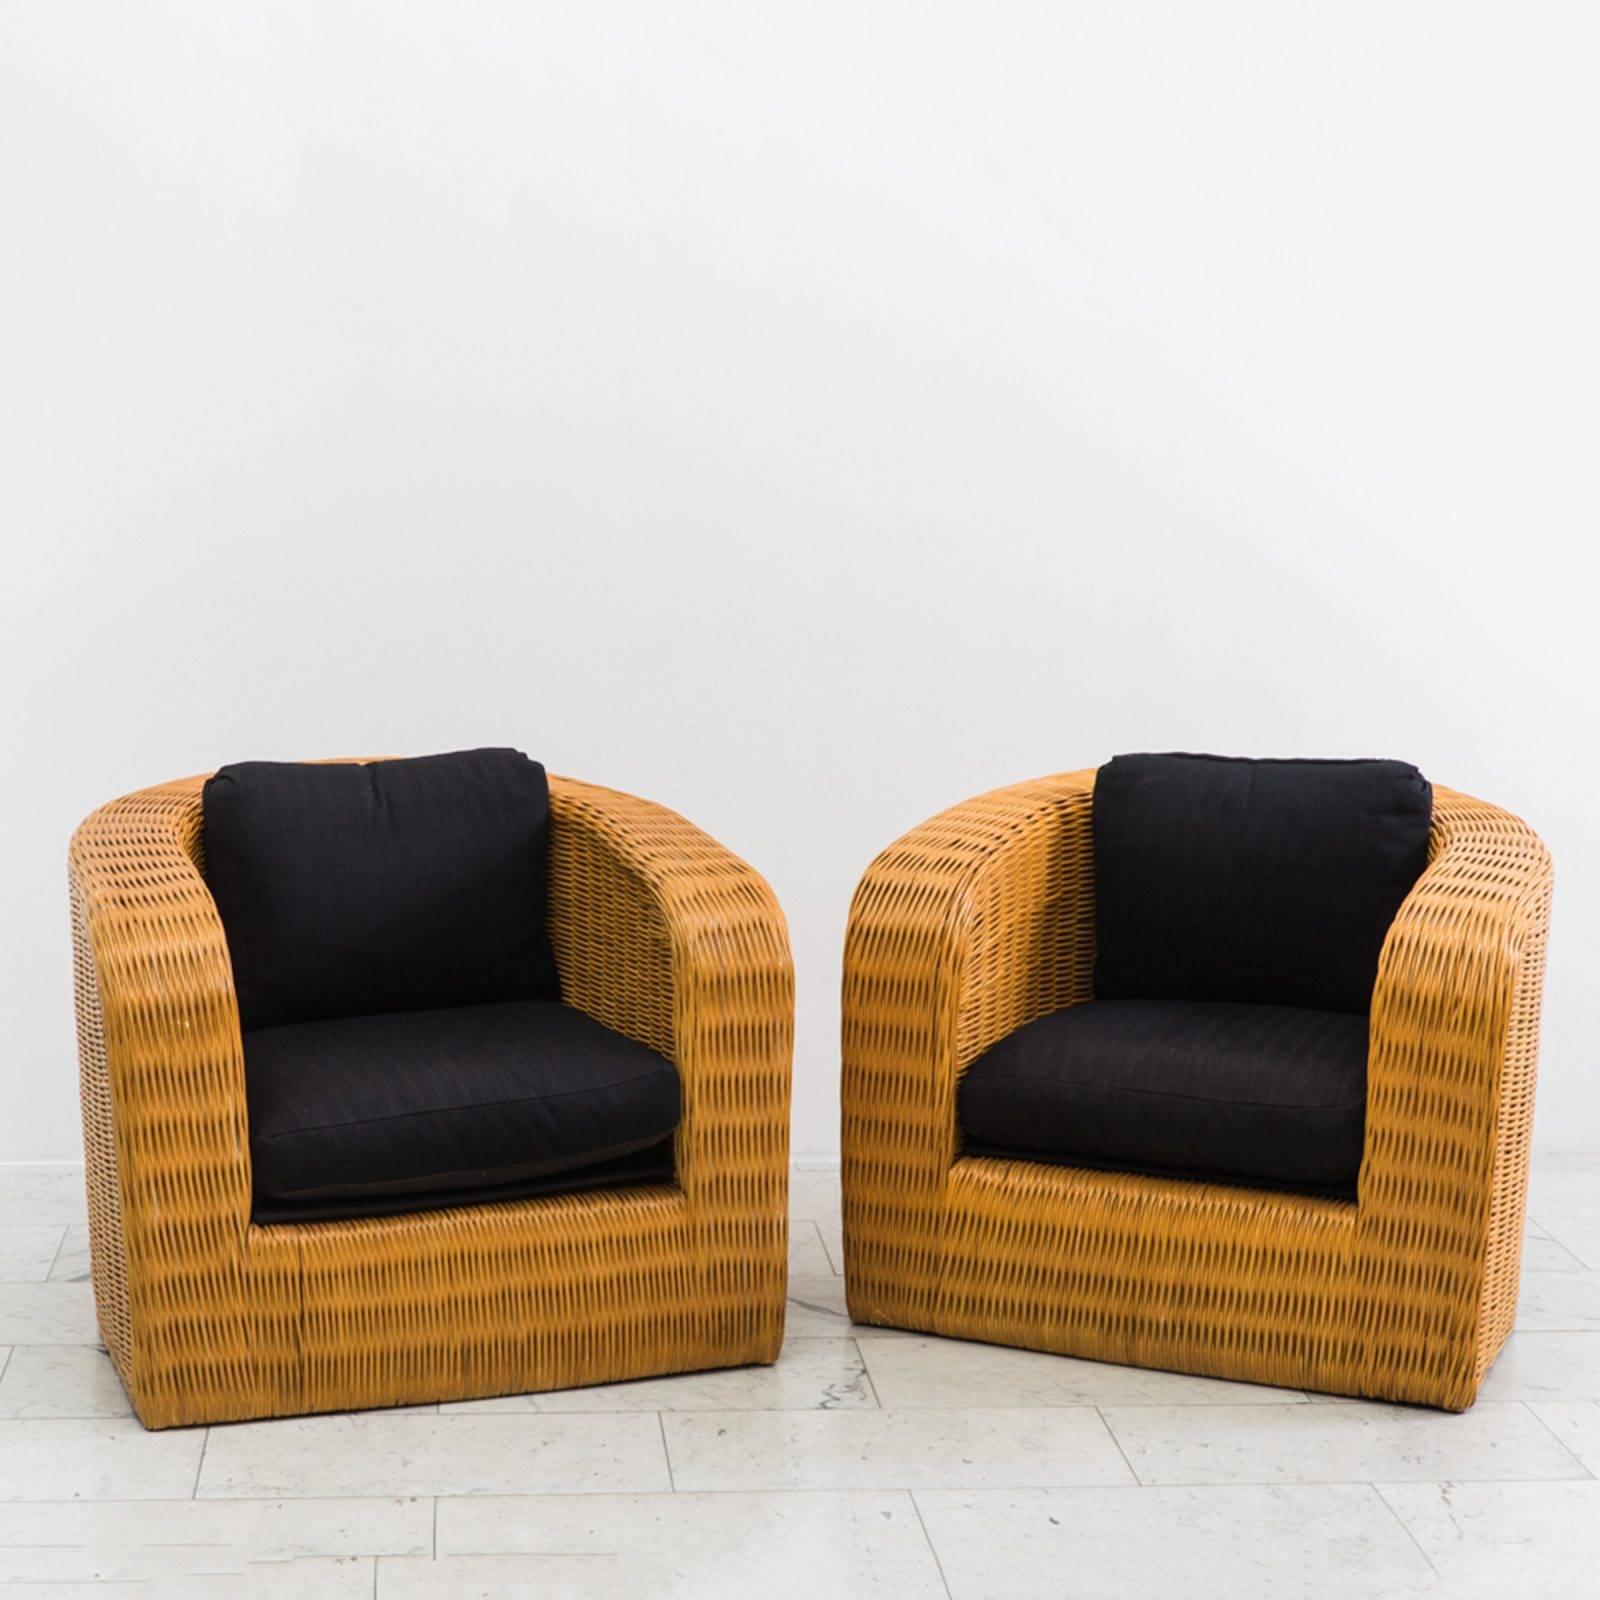 Karl Springer, Set of Four Wicker Pullman Chairs, USA, 1985